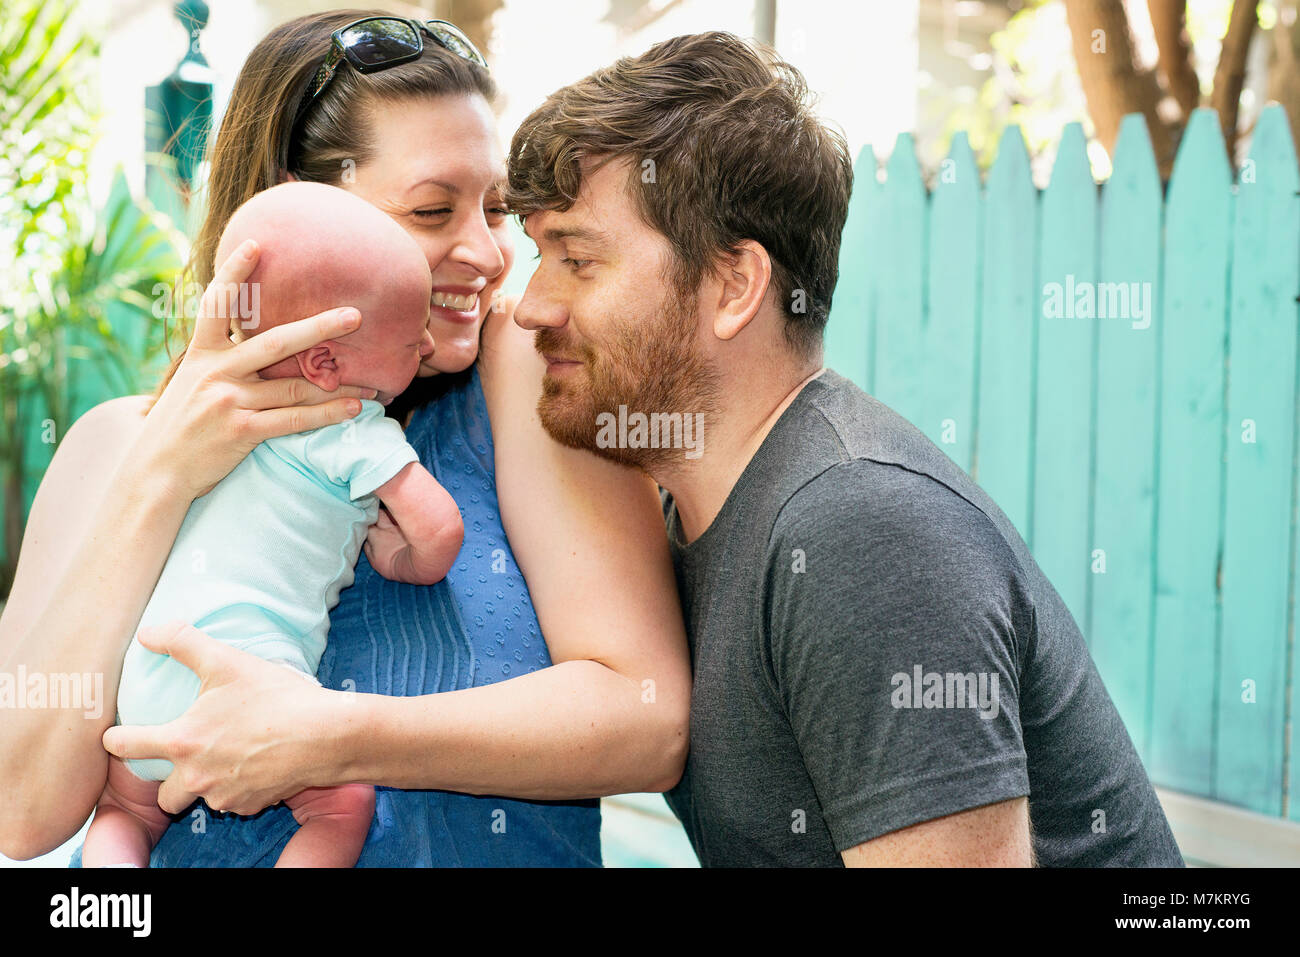 A family and their  5 week old newborn baby. Stock Photo